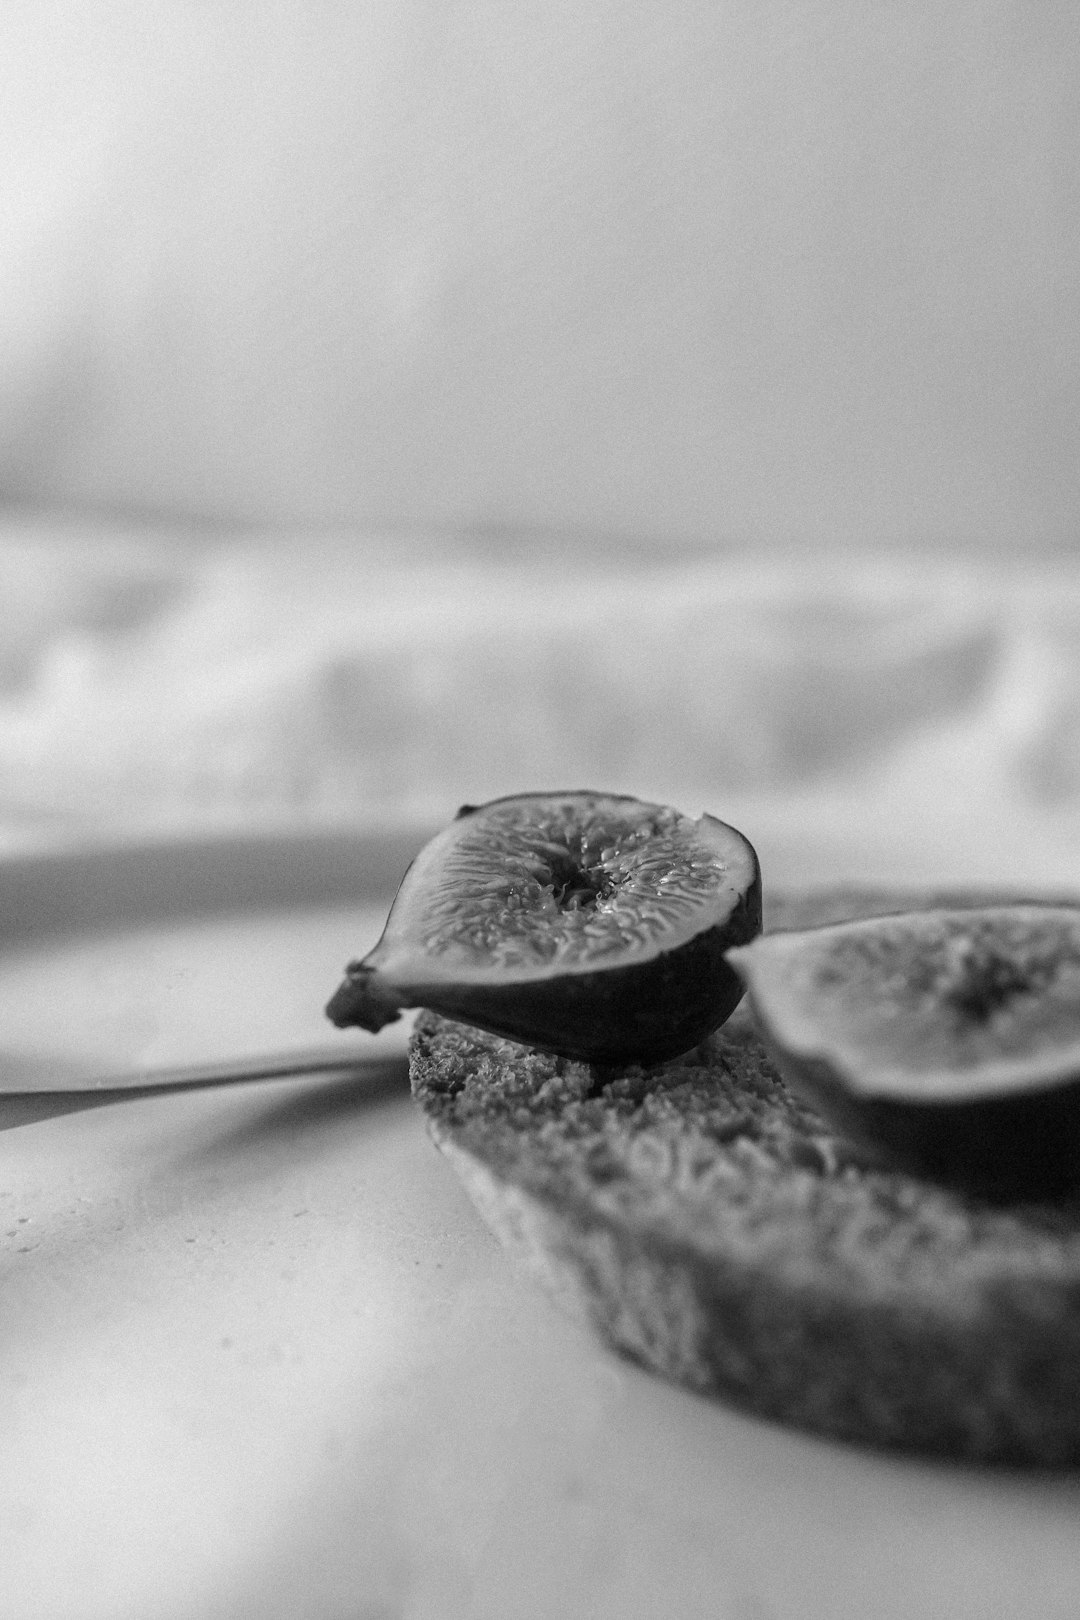 gray scale photo of 2 round fruits